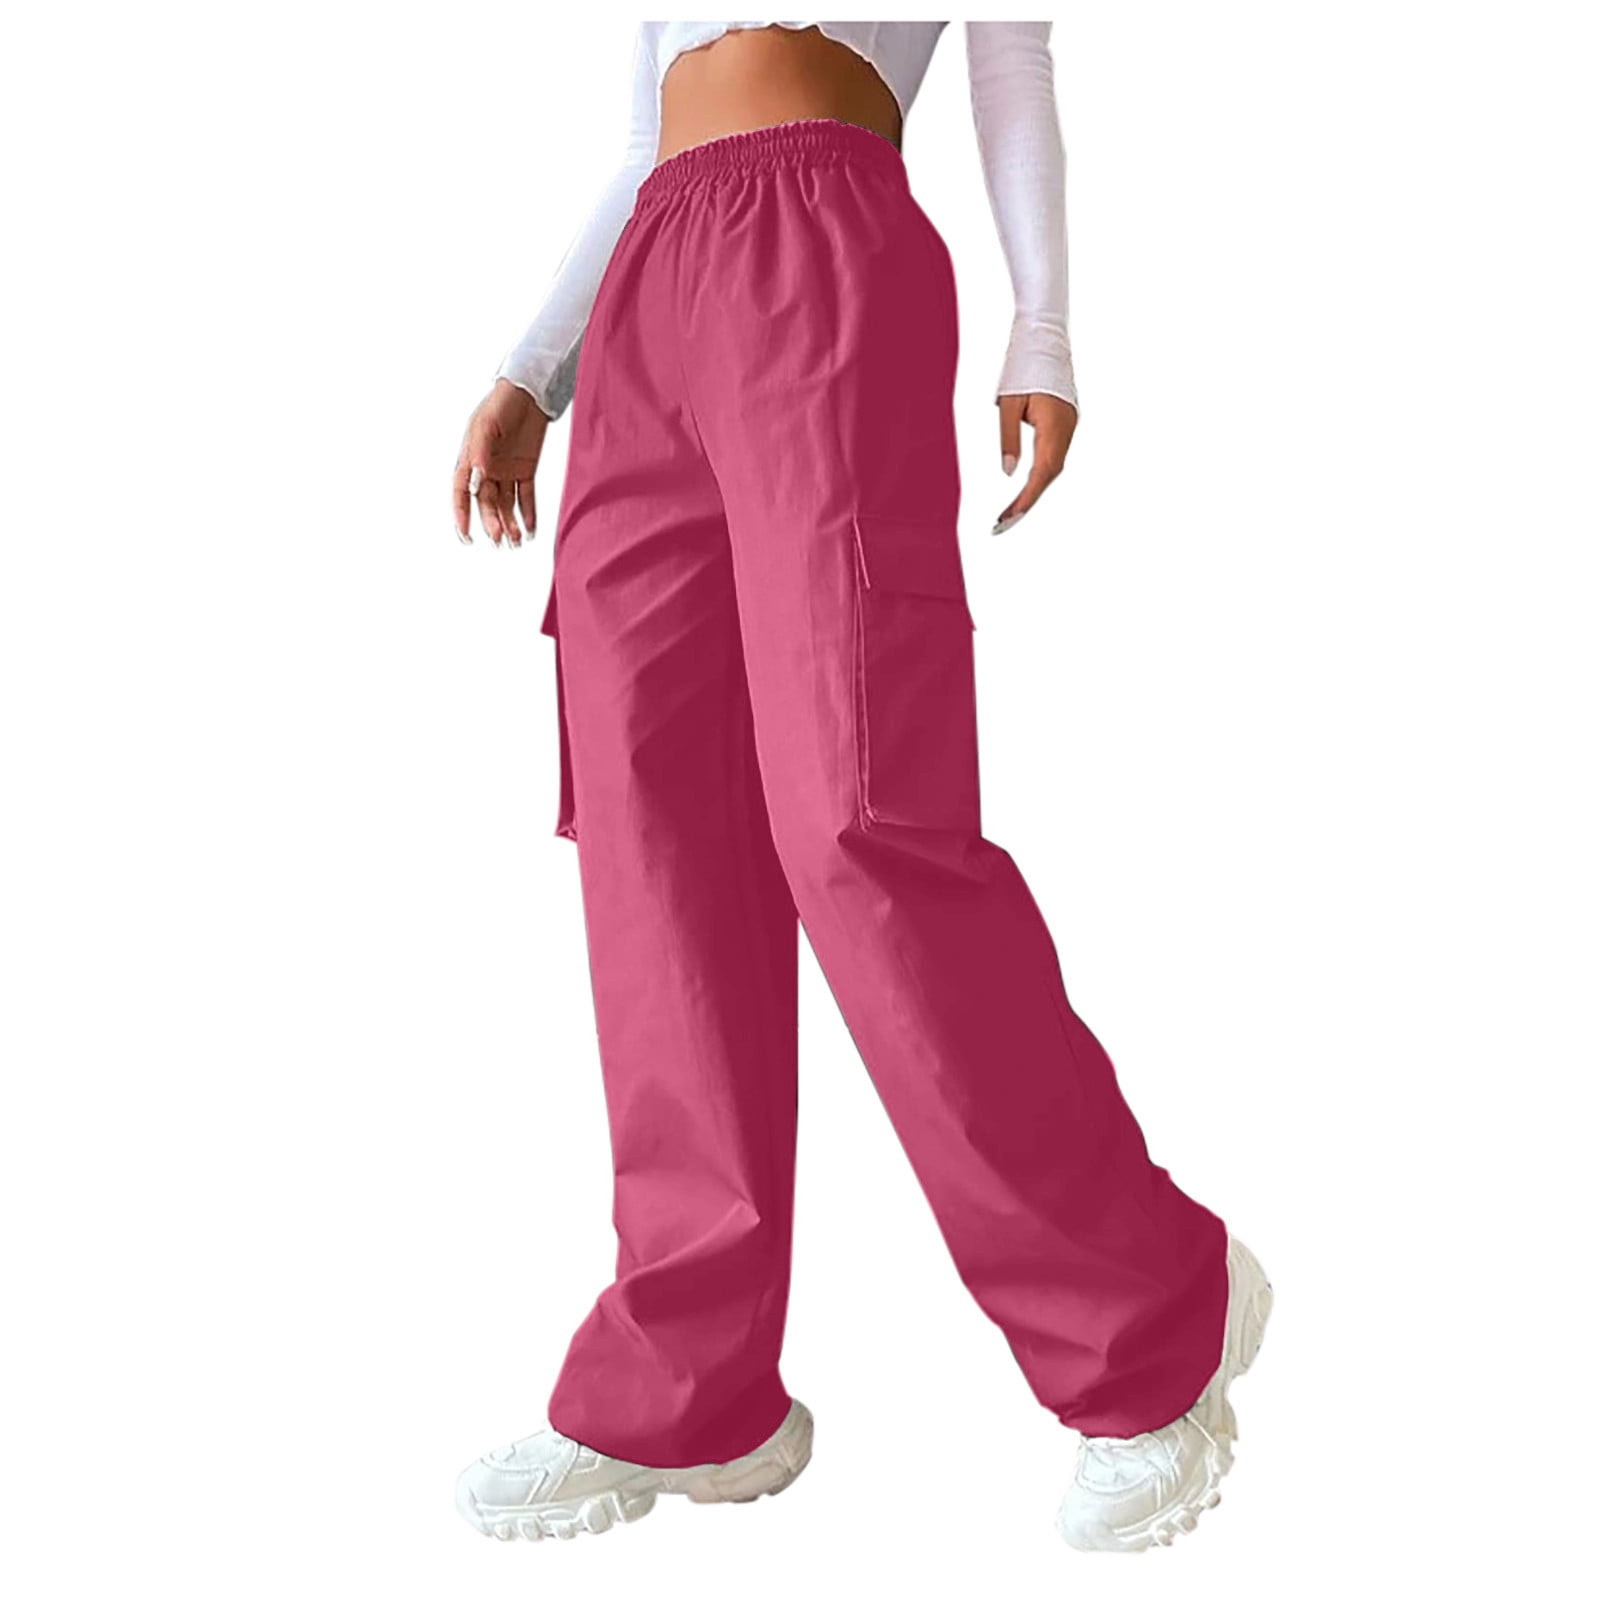 Stylish High Waist Harem Pants For Women Y2K Parachute Cargo Loose Trousers  Women In Pink 2000s From Basiliusy, $20.48